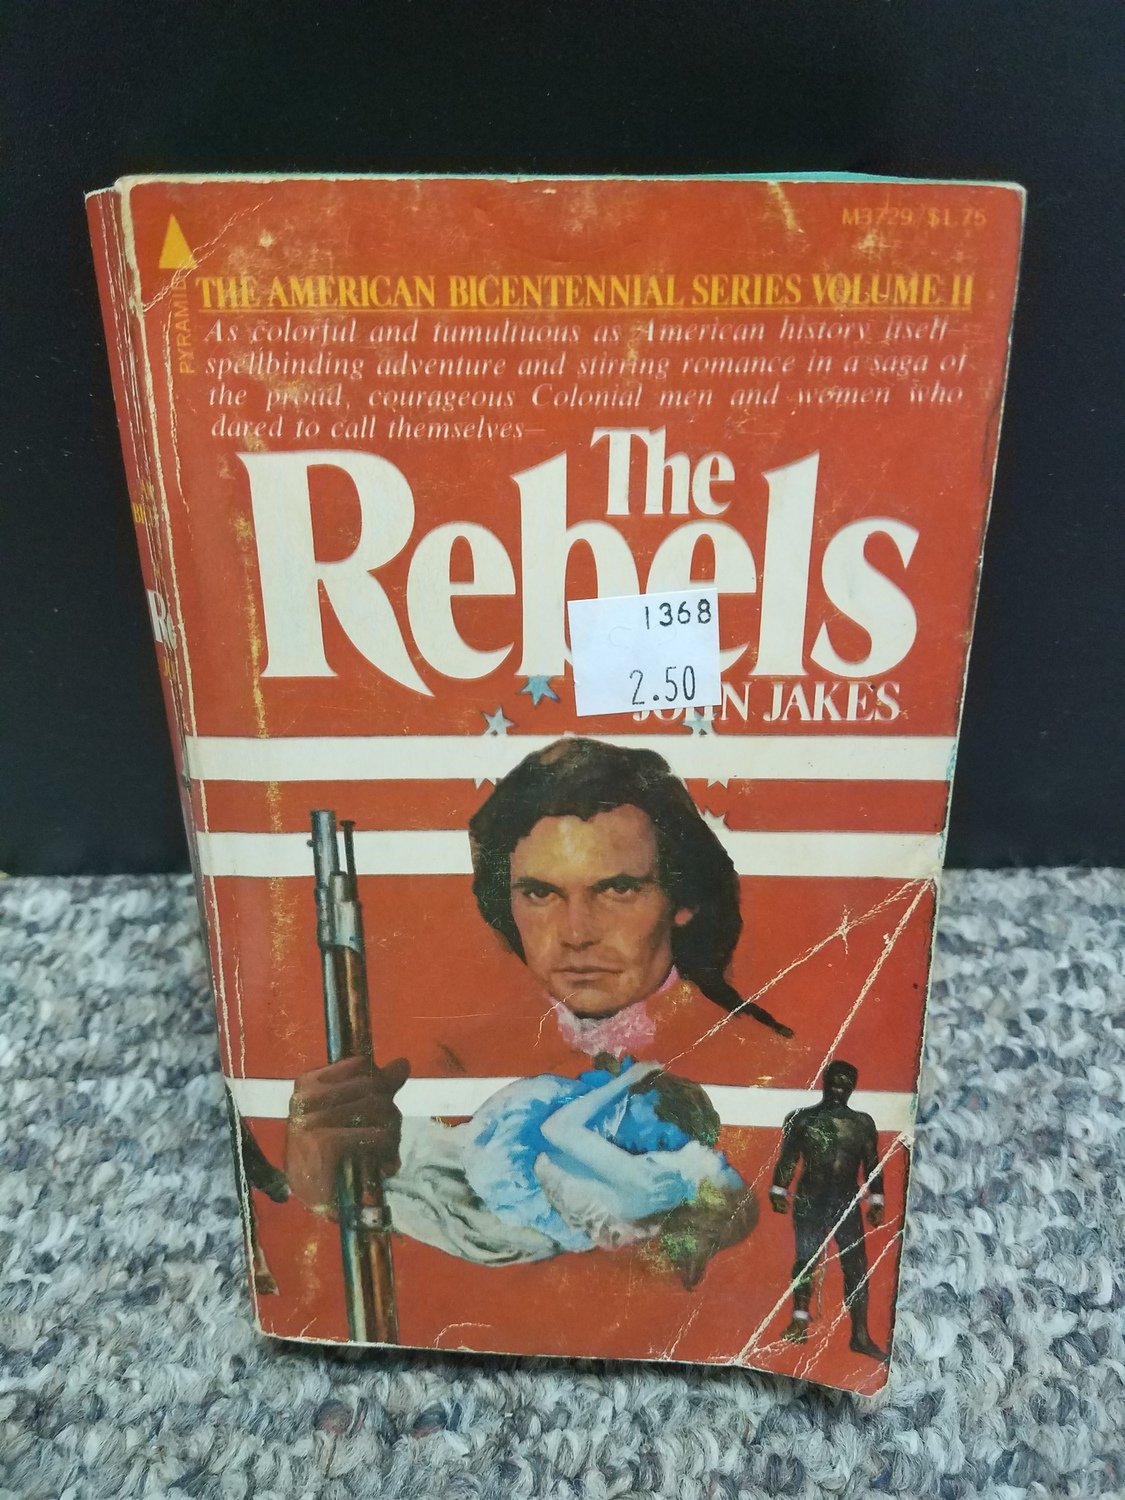 The Rebels by John Jakes